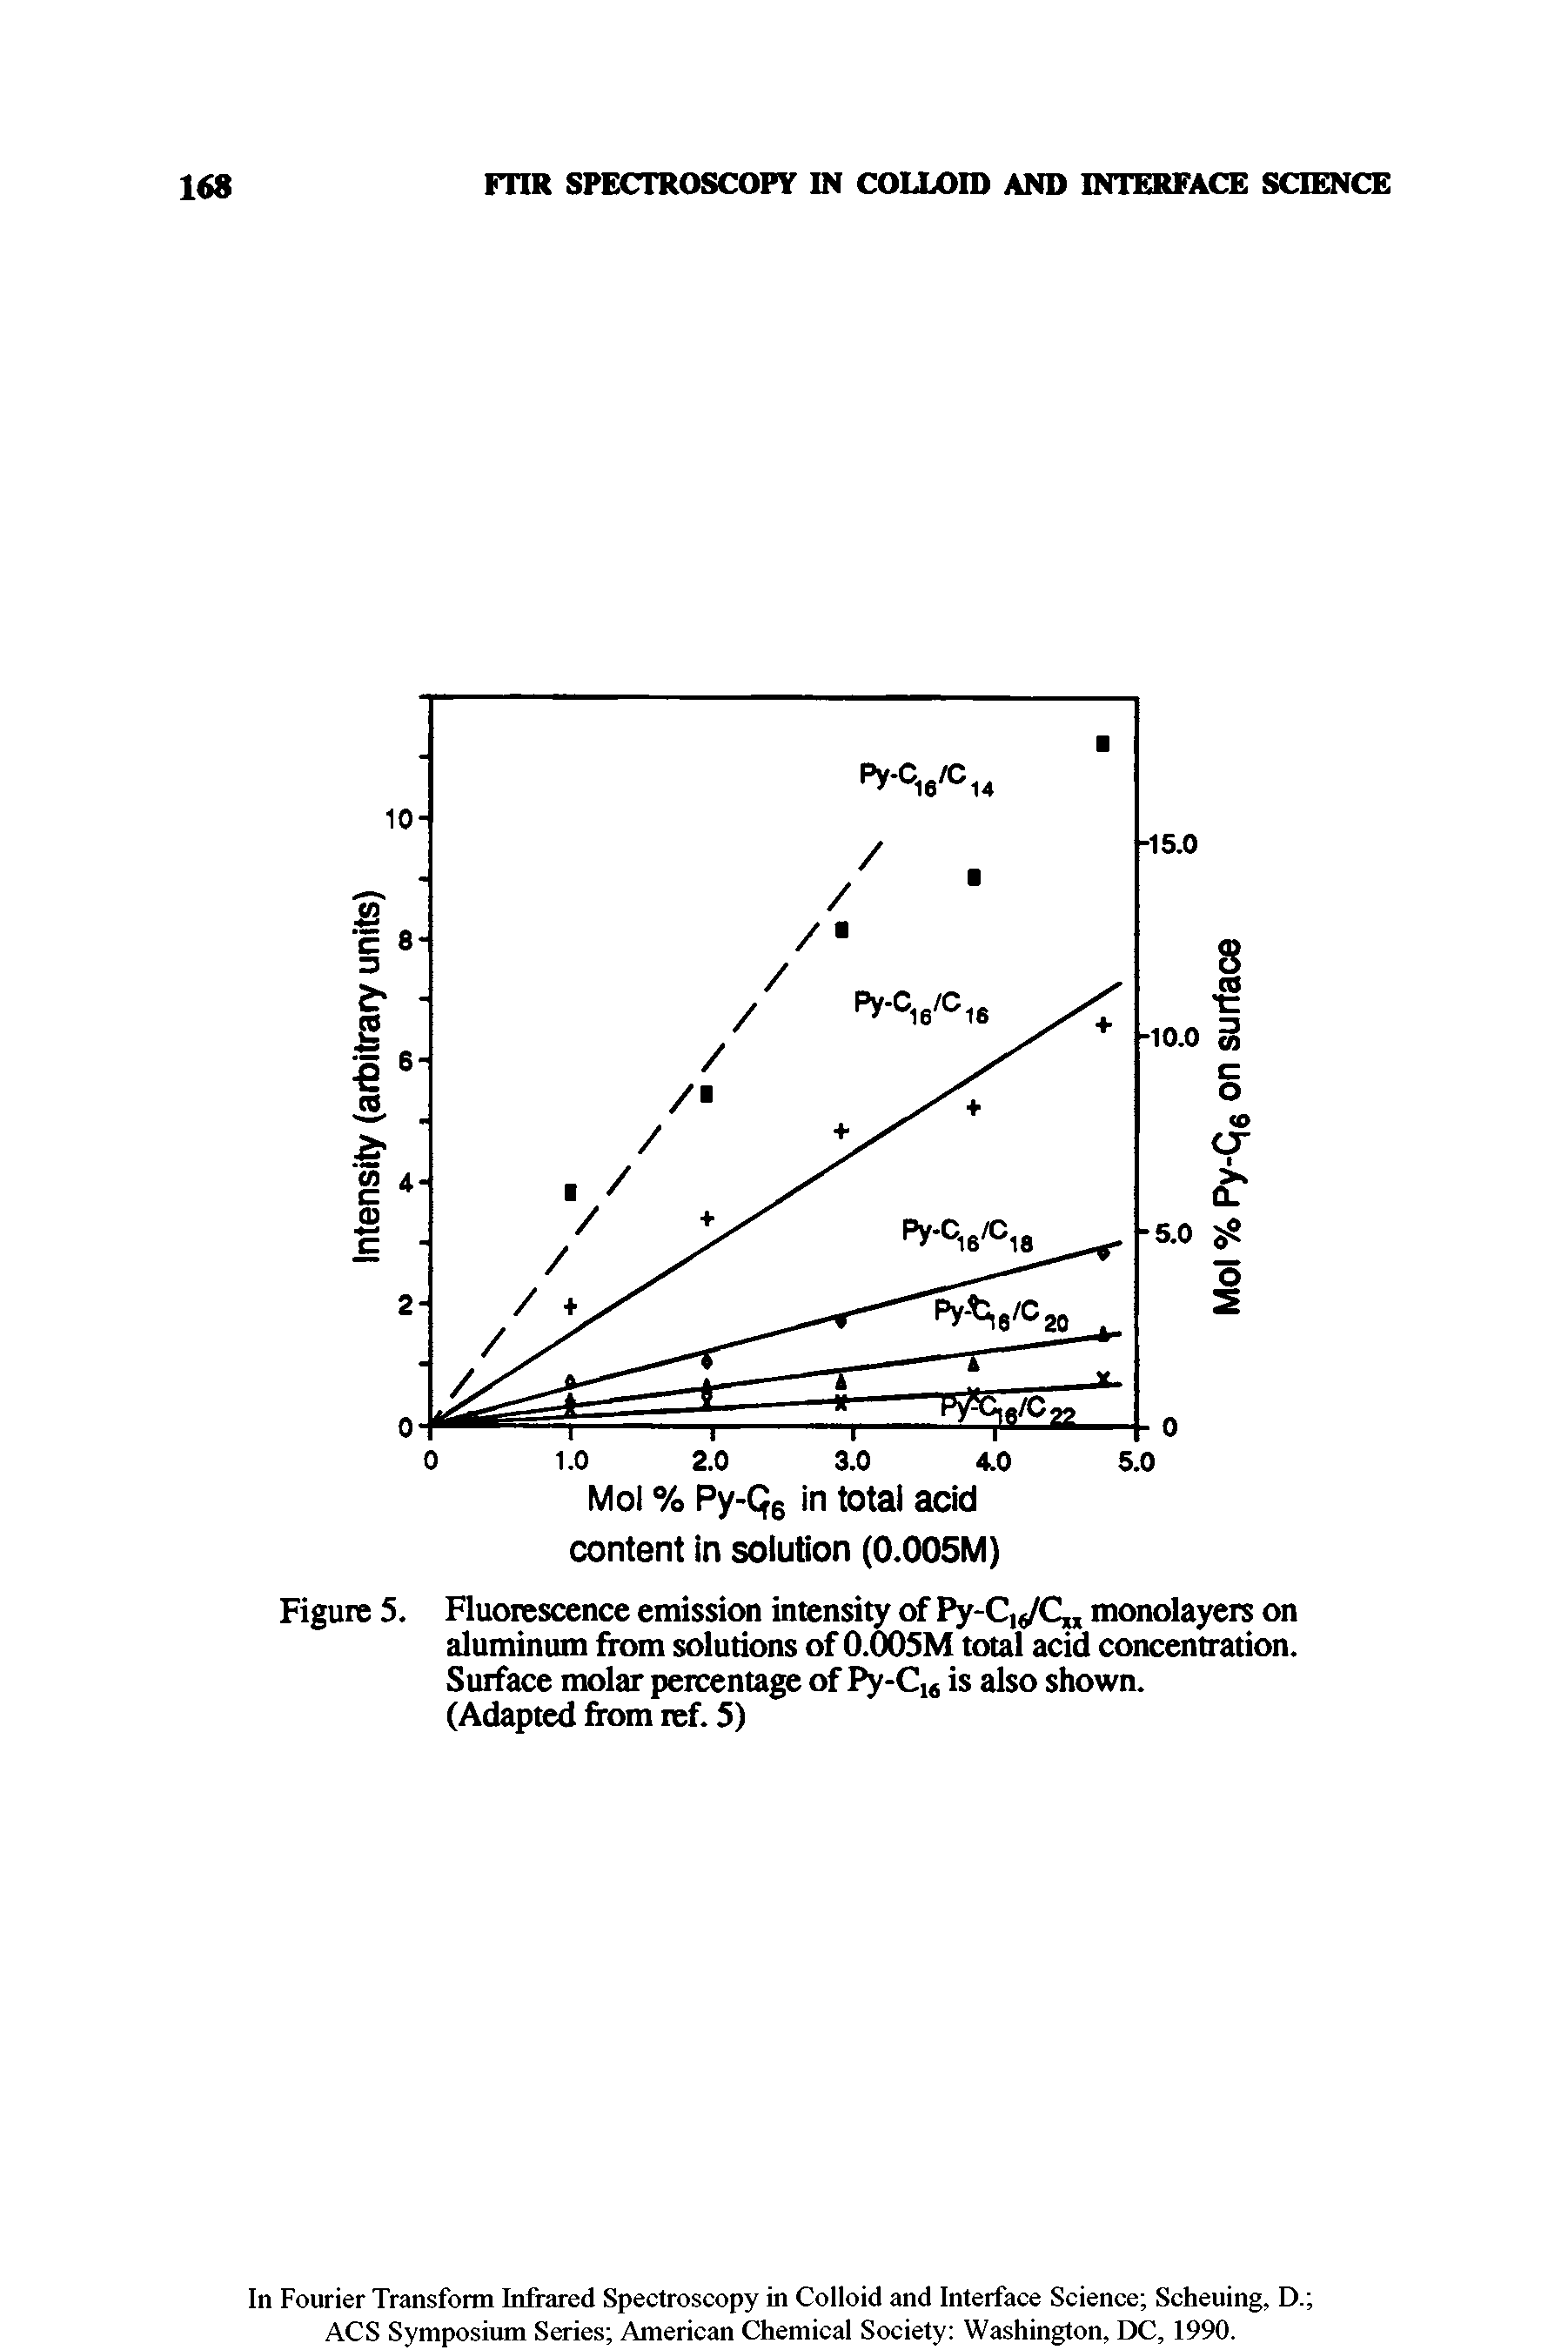 Figure 5. Fluorescence emission intensity of Py-Cl6/C monolayers on aluminum from solutions of 0.005M total acid concentration. Surface molar percentage of Py-C14 is also shown.